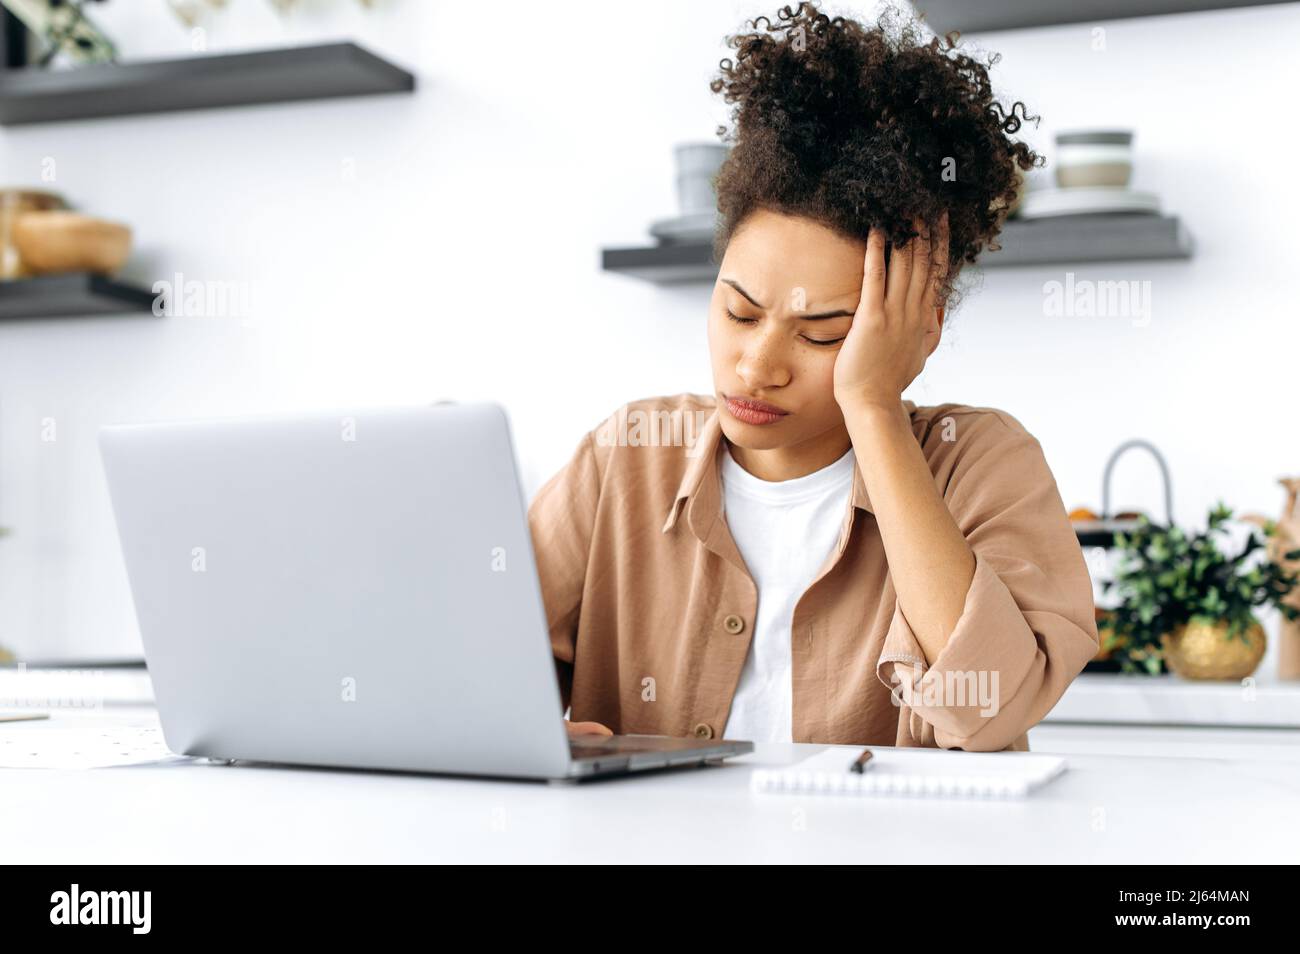 Exhausted afro-american girl, freelancer or student, working or study remotely from home, tired of boring online work, suffering from chronic fatigue, overwork, falls asleep at workplace, closed eyes Stock Photo